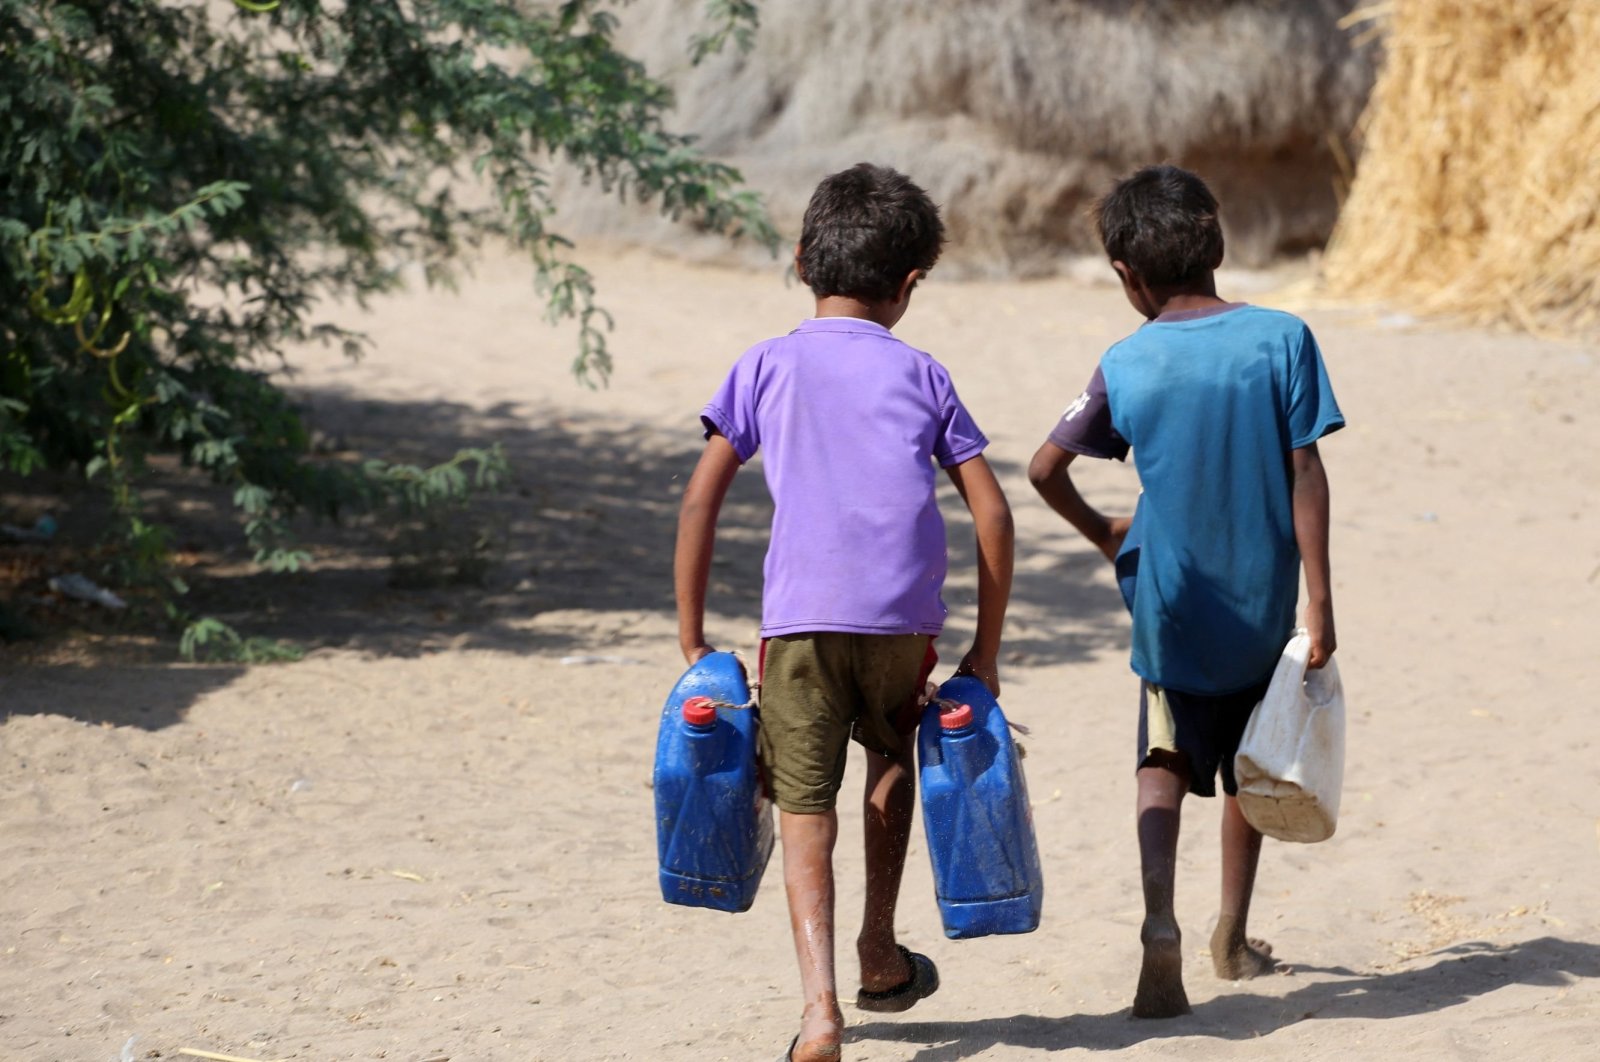 Yemeni children carry jerrycans at a makeshift camp for people who fled fighting between Huthi rebels and the Saudi-backed government forces in the village of Hays near the conflict zone in Yemen&#039;s western province of Hodeida, Jan. 28, 2022. (AFP Photo)